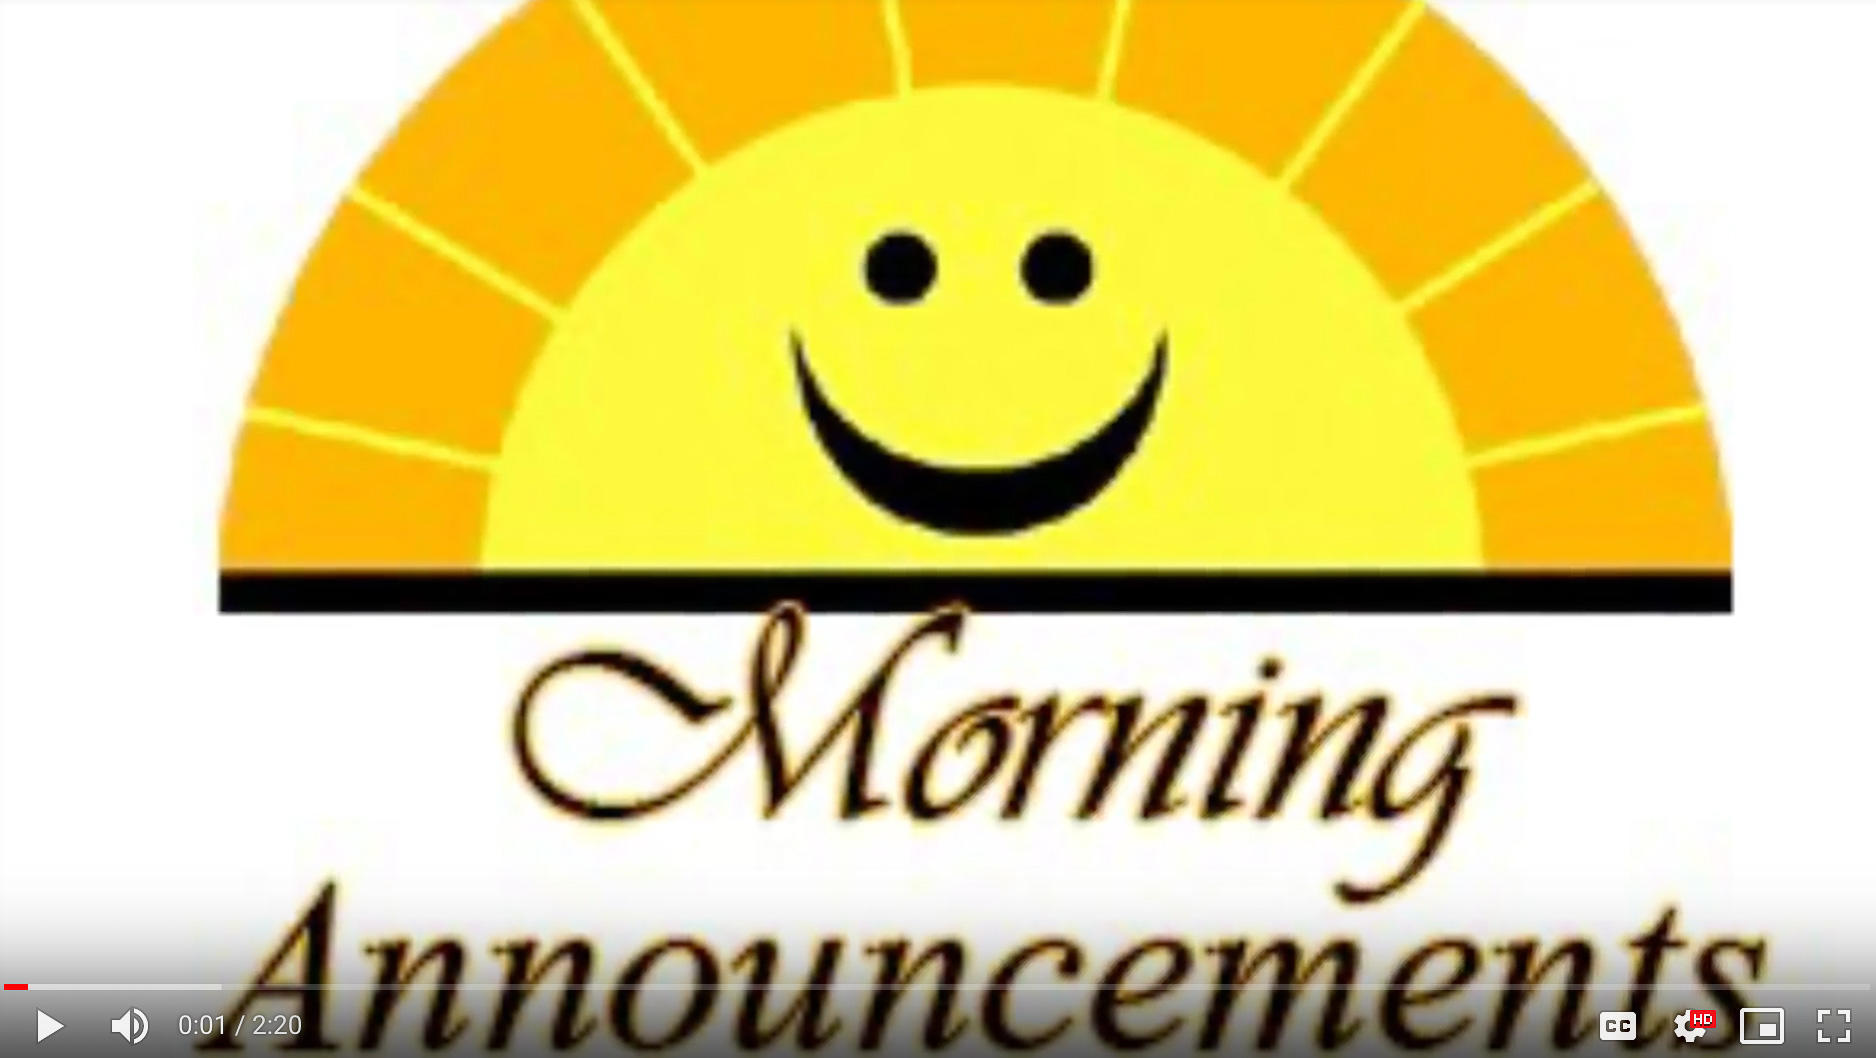 Morning Announcement